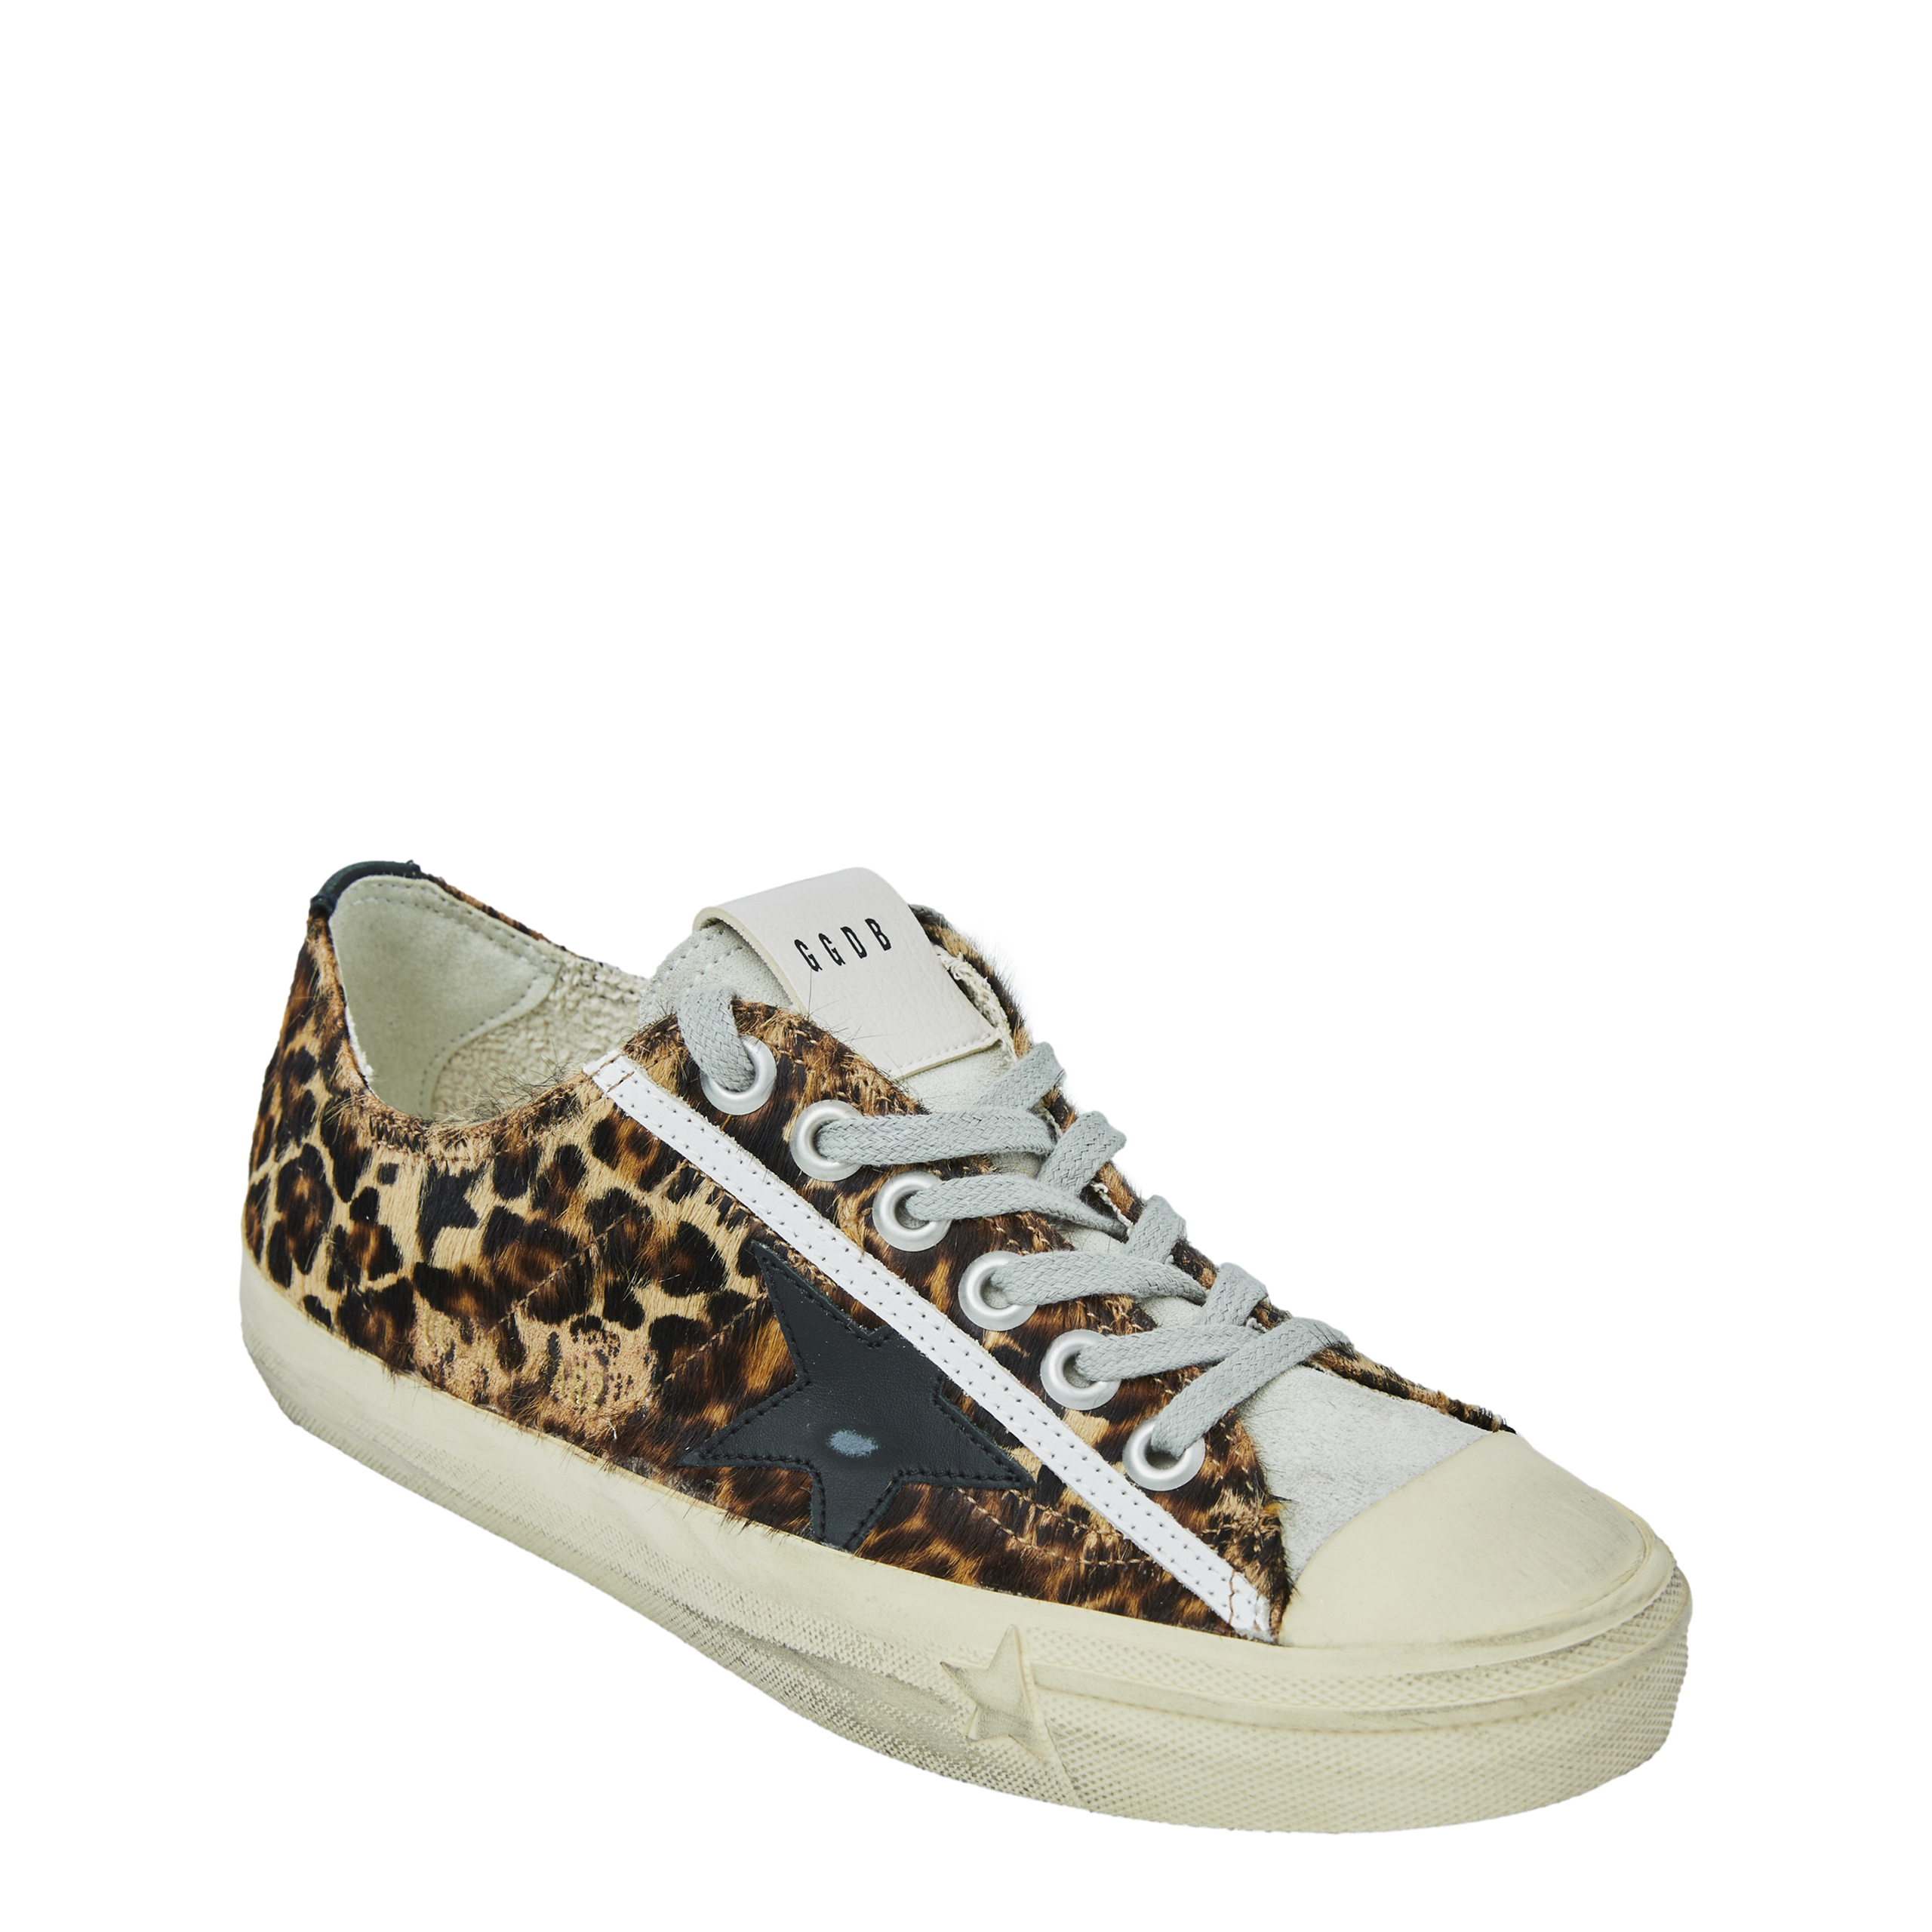 None Golden Goose Deluxe Brand GMF00129/F005030/81629, размер 41;42;43;44;45;46